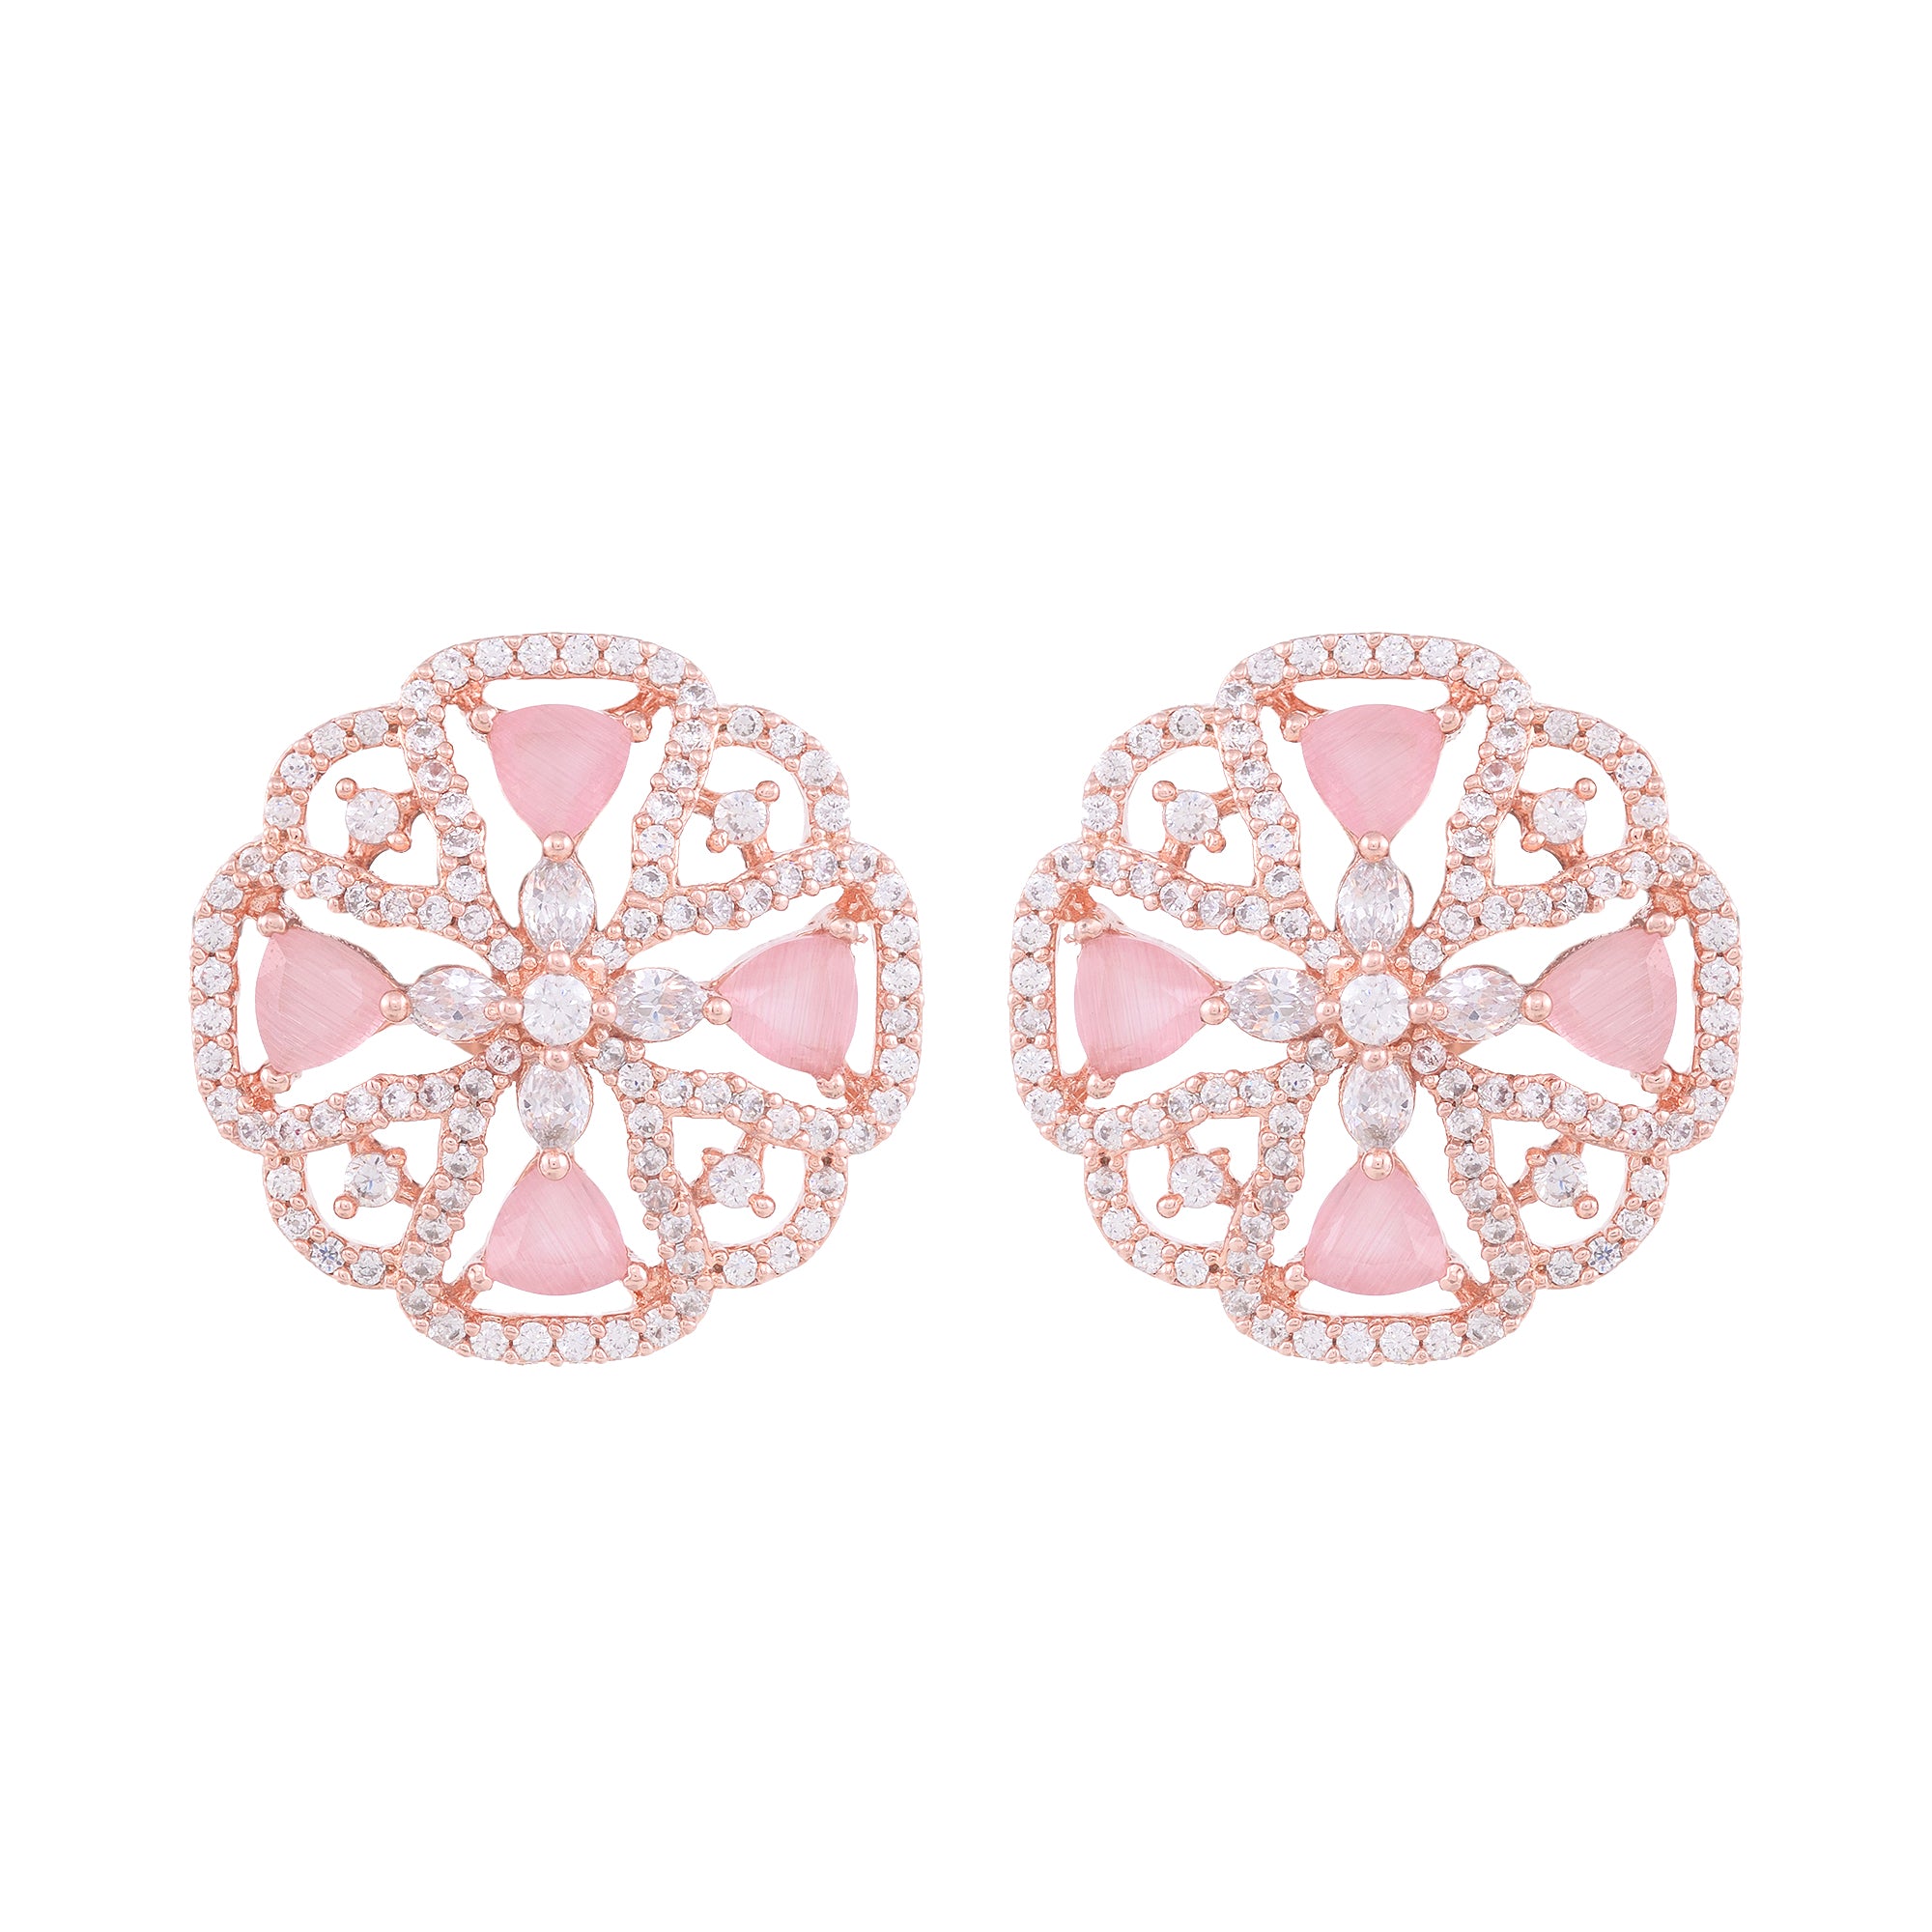 Crown Design Rose Quartz Studs Pastel Pink Tops Ad Encrusted Rose Gold Plated Earrings for Women and Girls - Saraf RS Jewellery